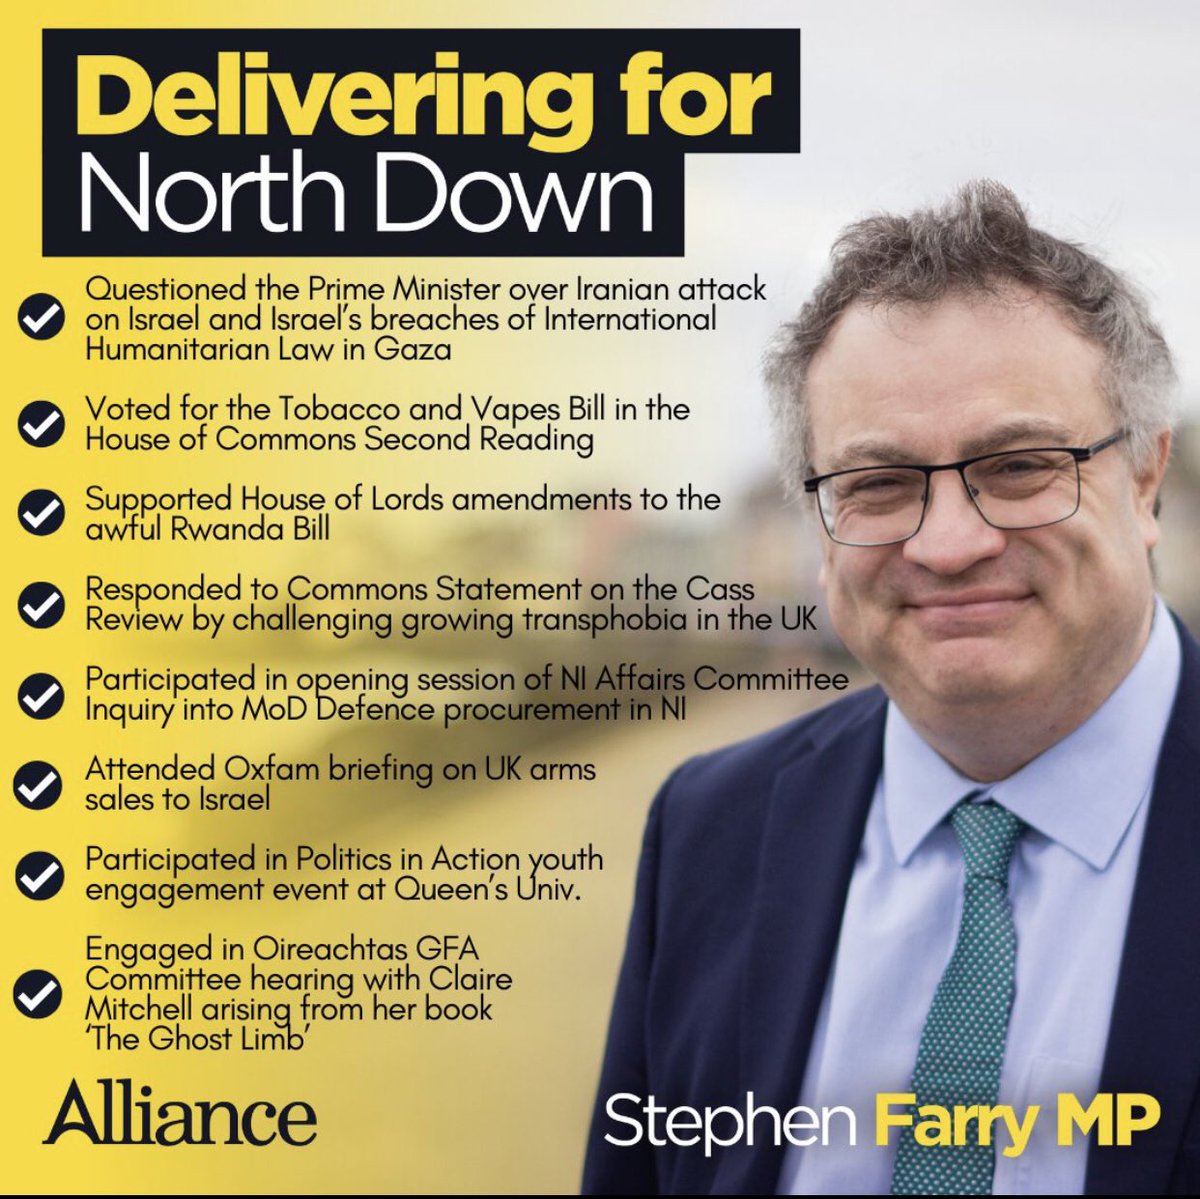 Alliance - ‘he ticks all the boxes.’ Well, there is that. What a shame none relate to his North Down constituency.